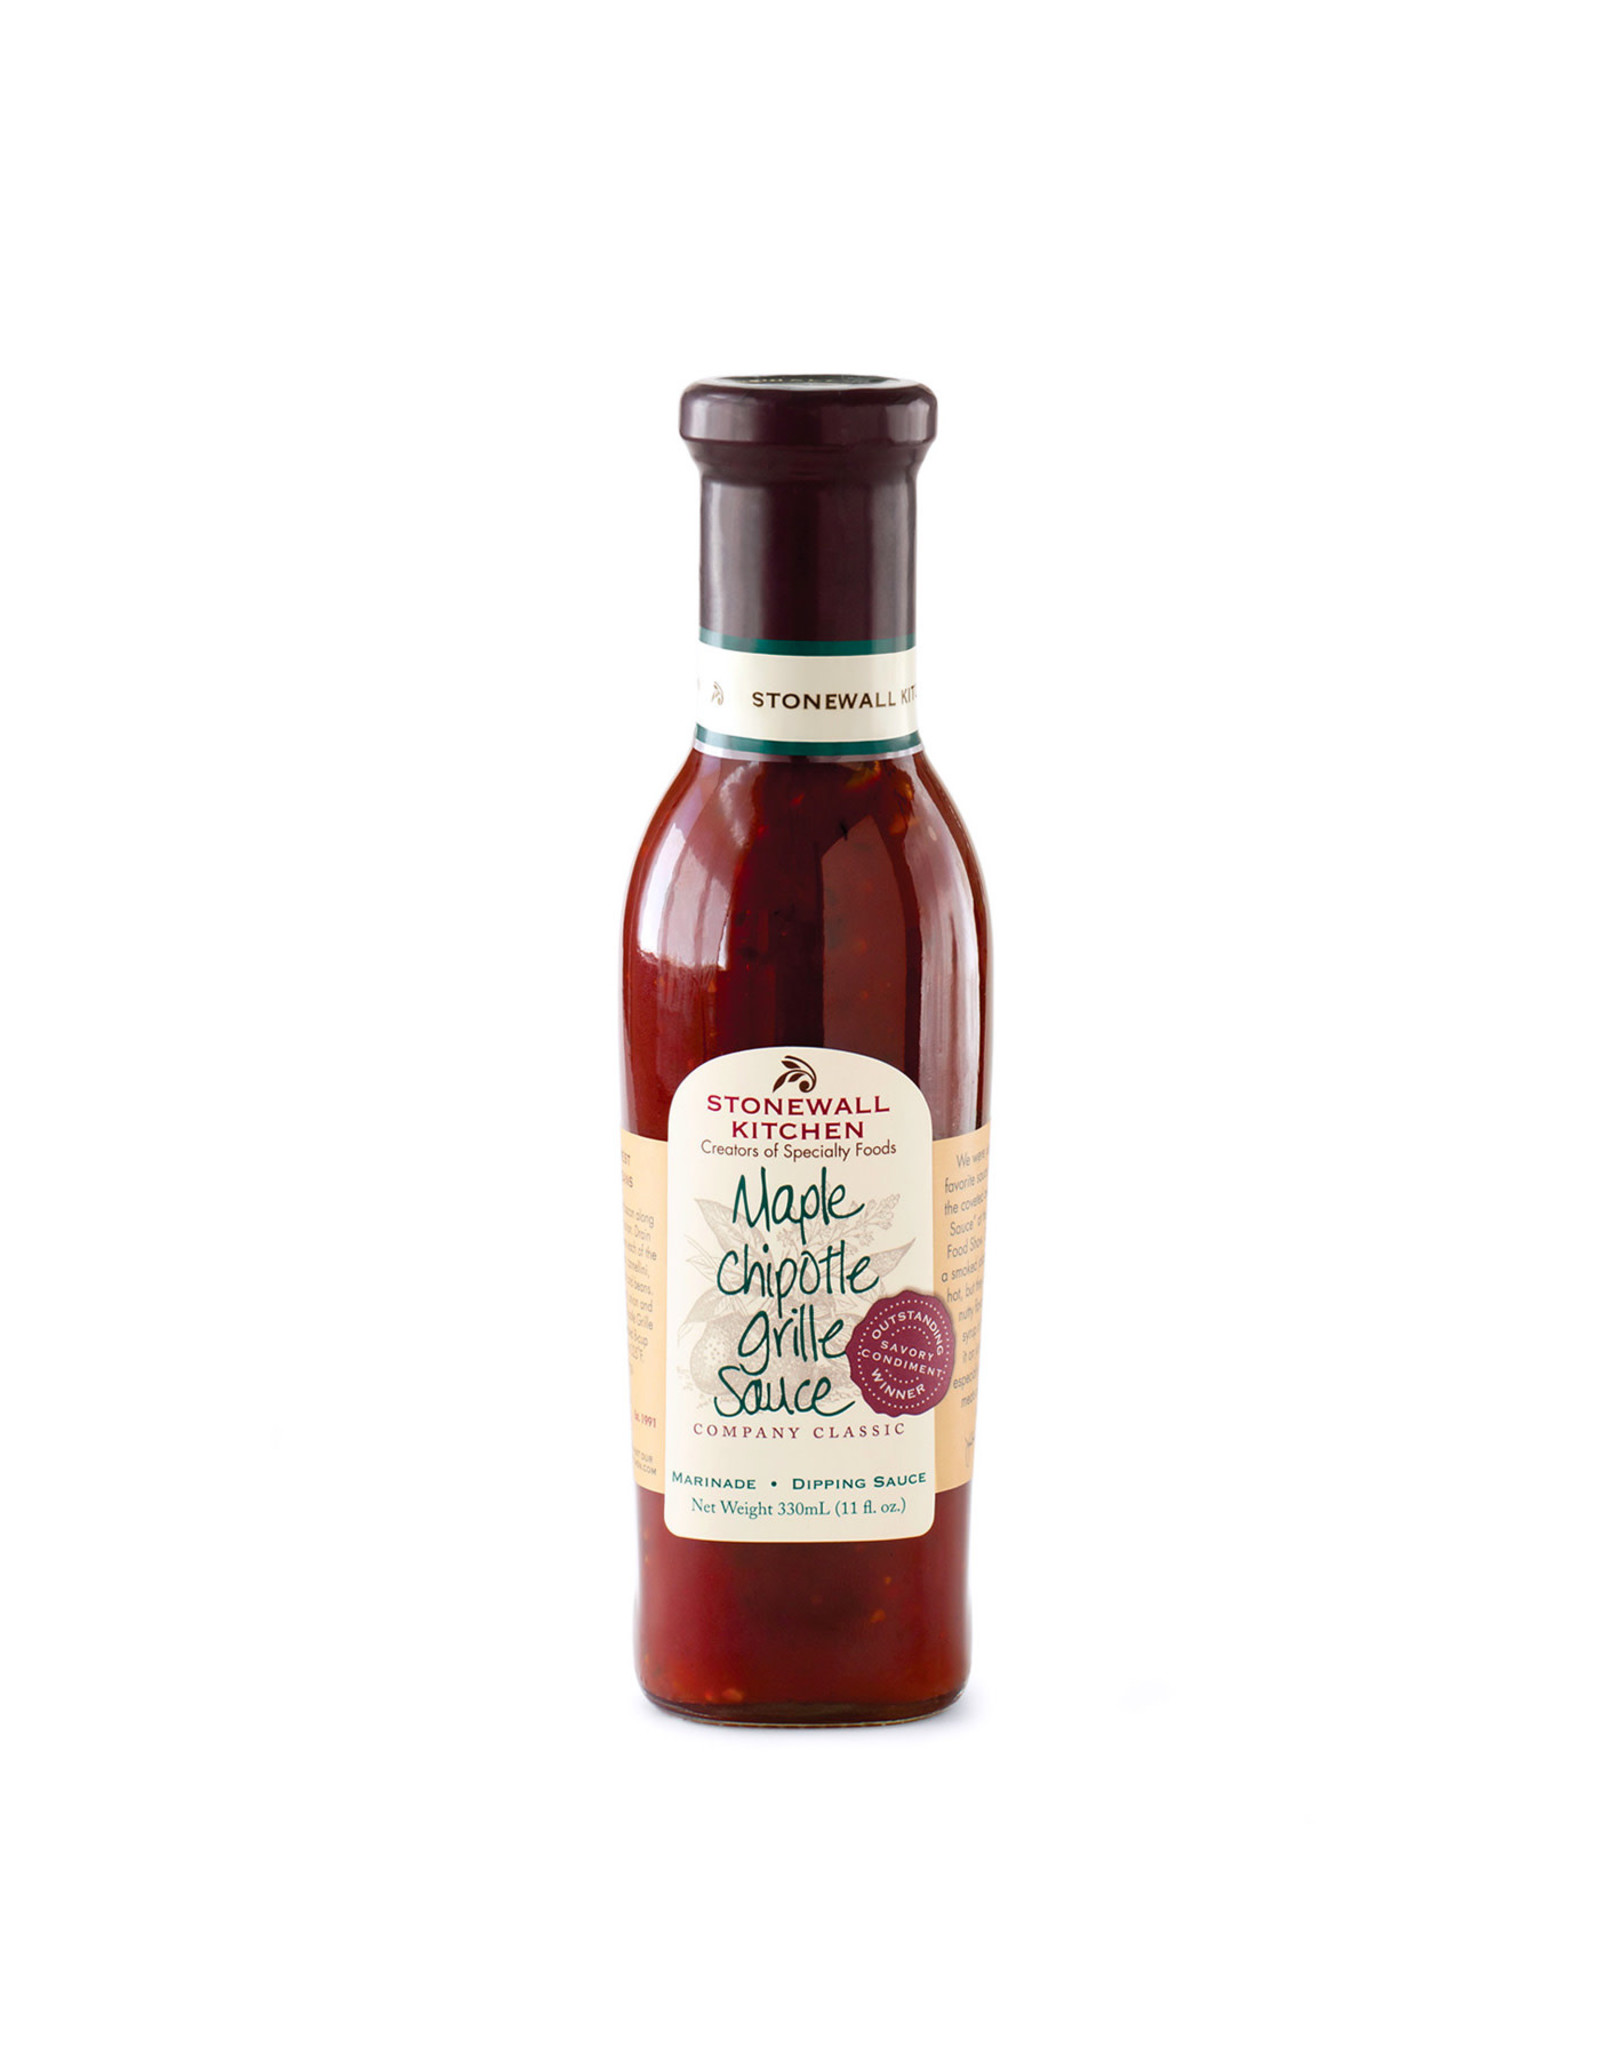 STONEWALL KITCHEN MAPLE CHIPOTLE GRILLE SAUCE